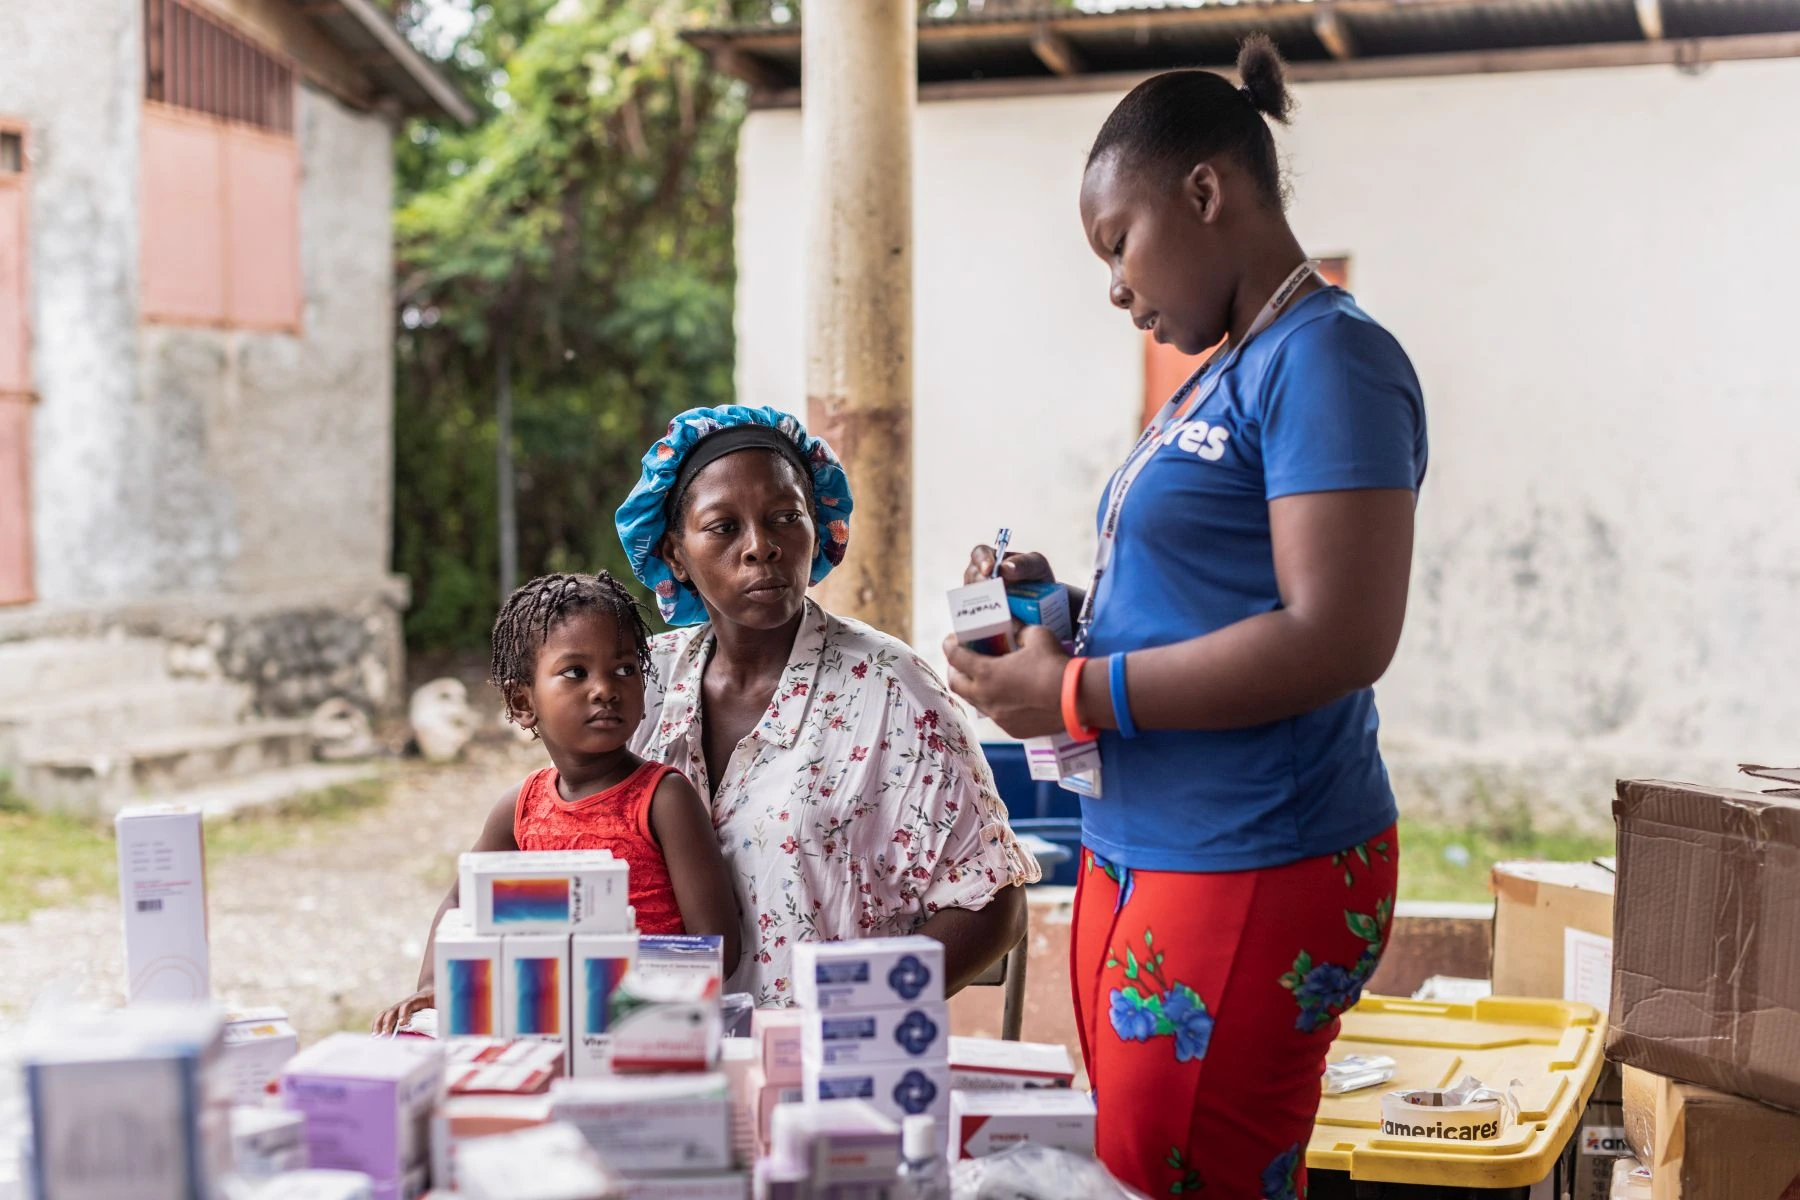 Standing medical team member in blue shirt prepares medicine for mother and daughter seated at table with supplies.